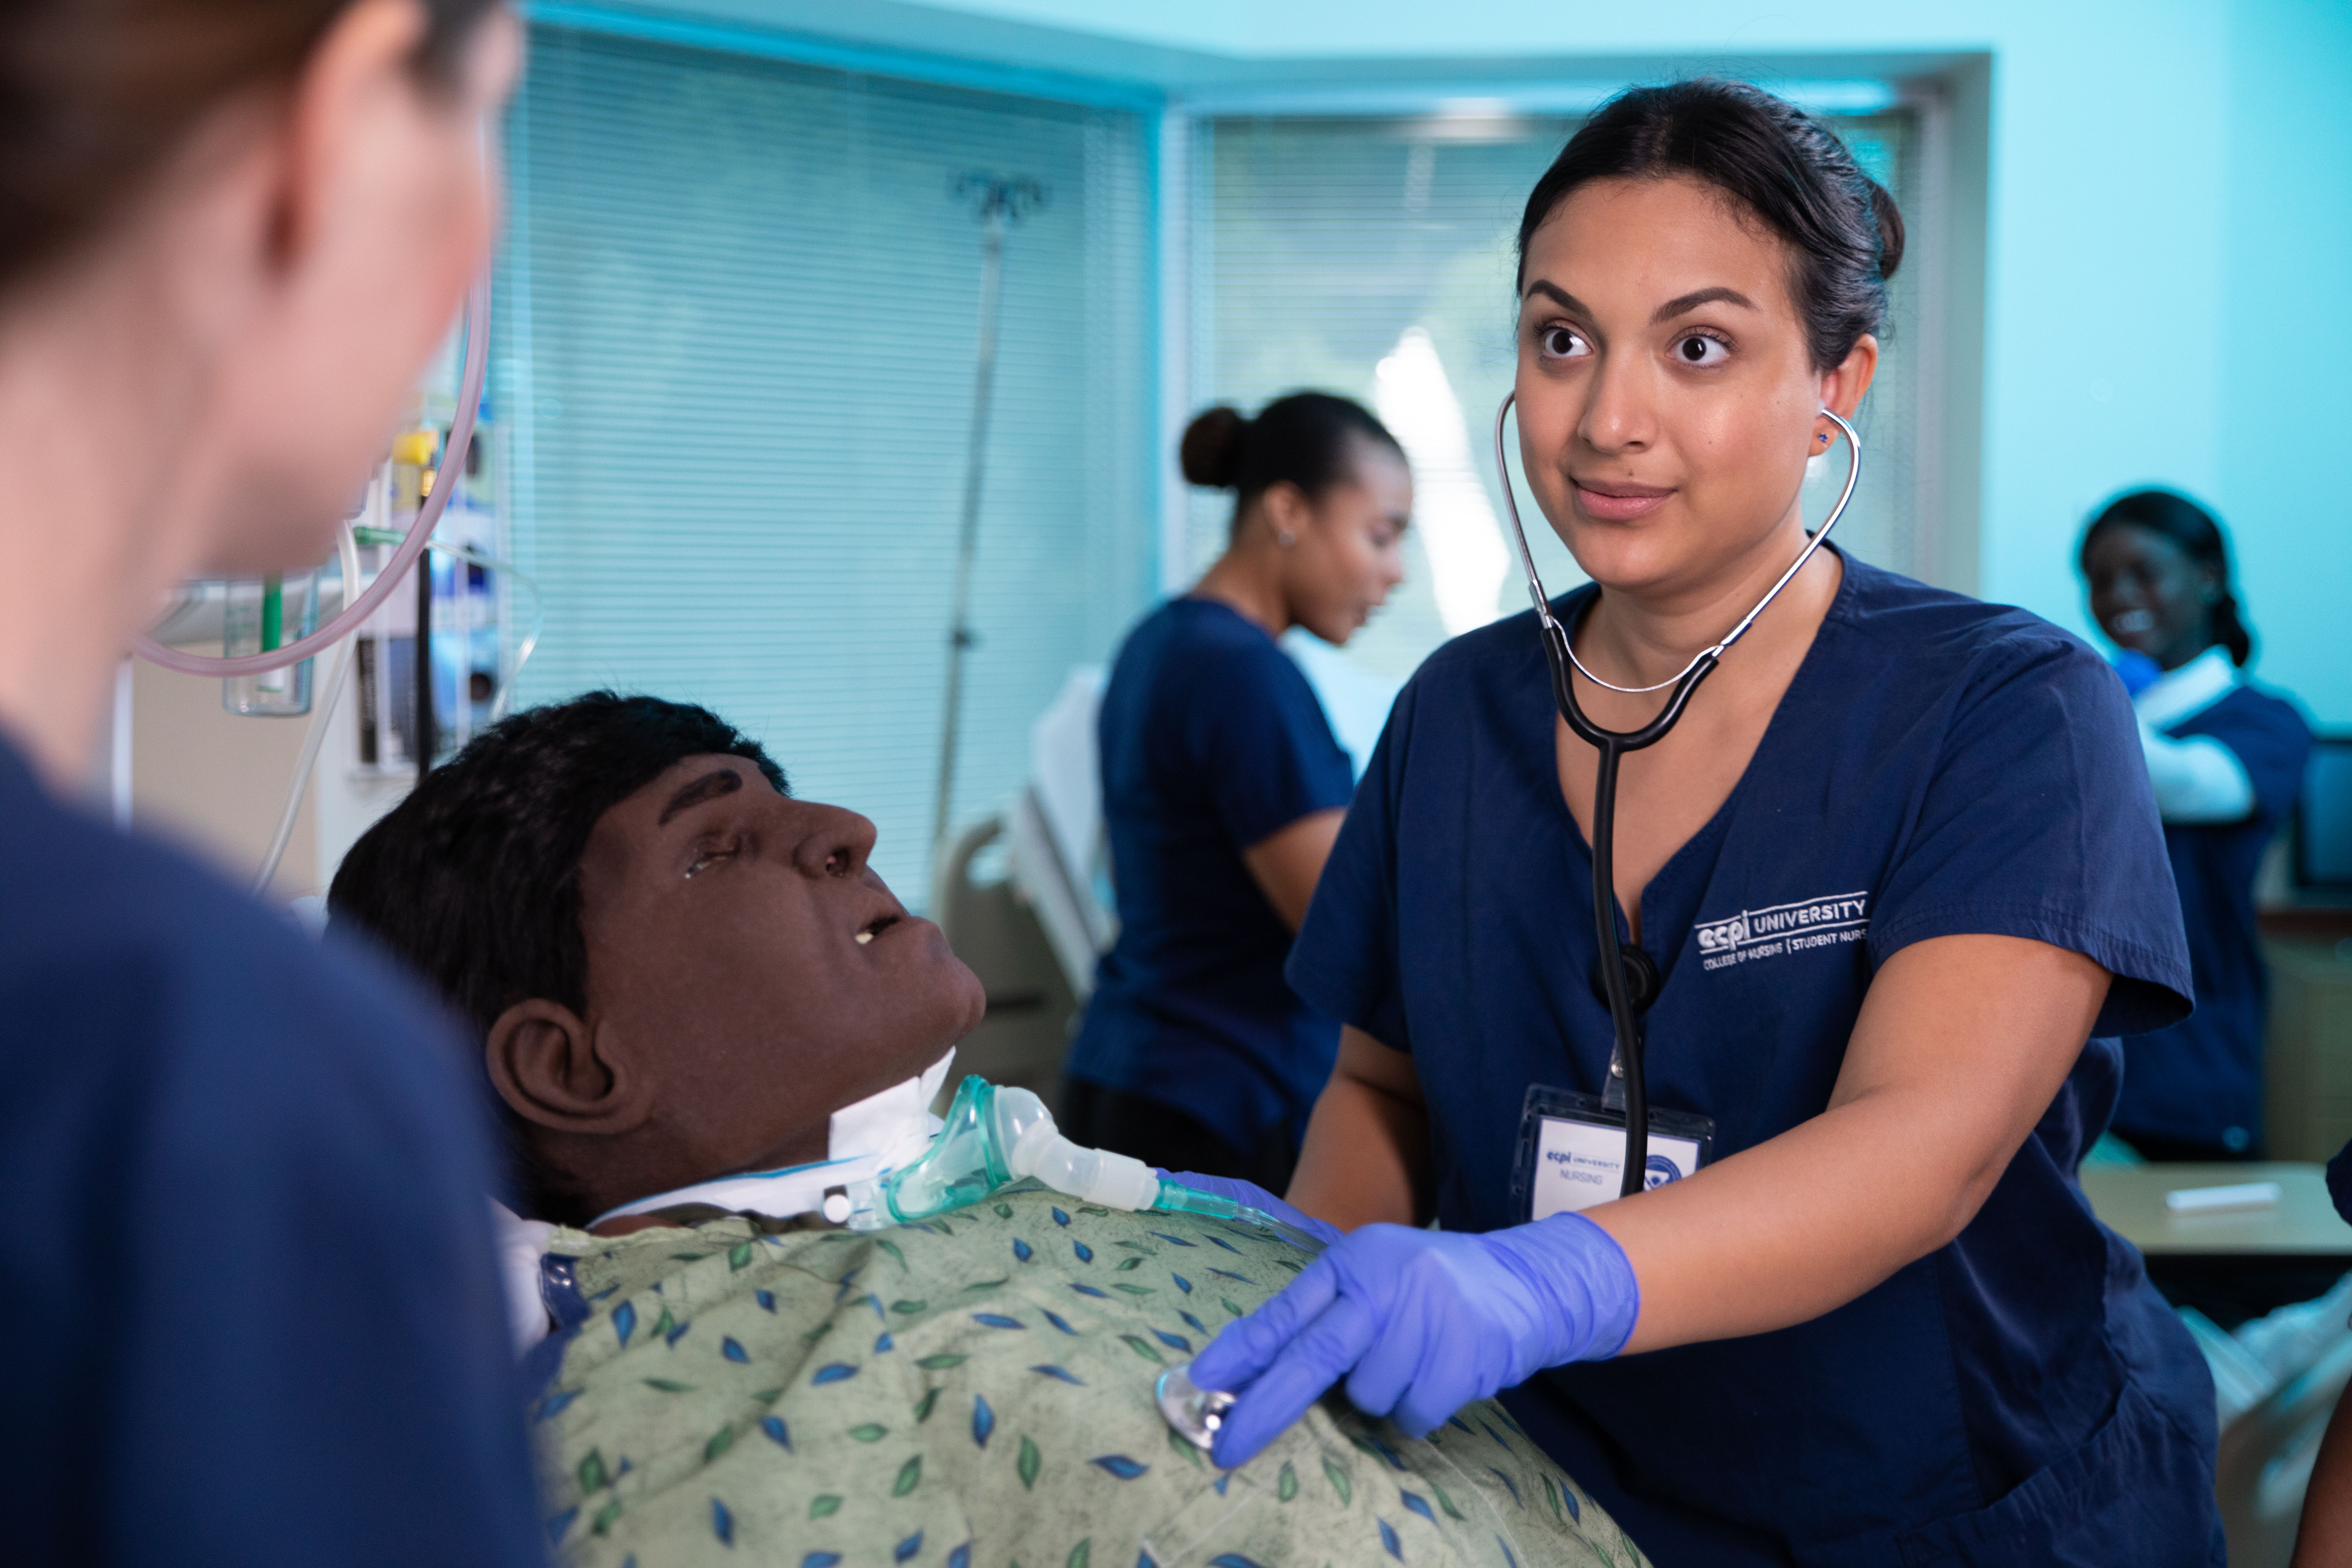 Nursing Demands and Expectations: What Will Your Role as Nurse be Like?